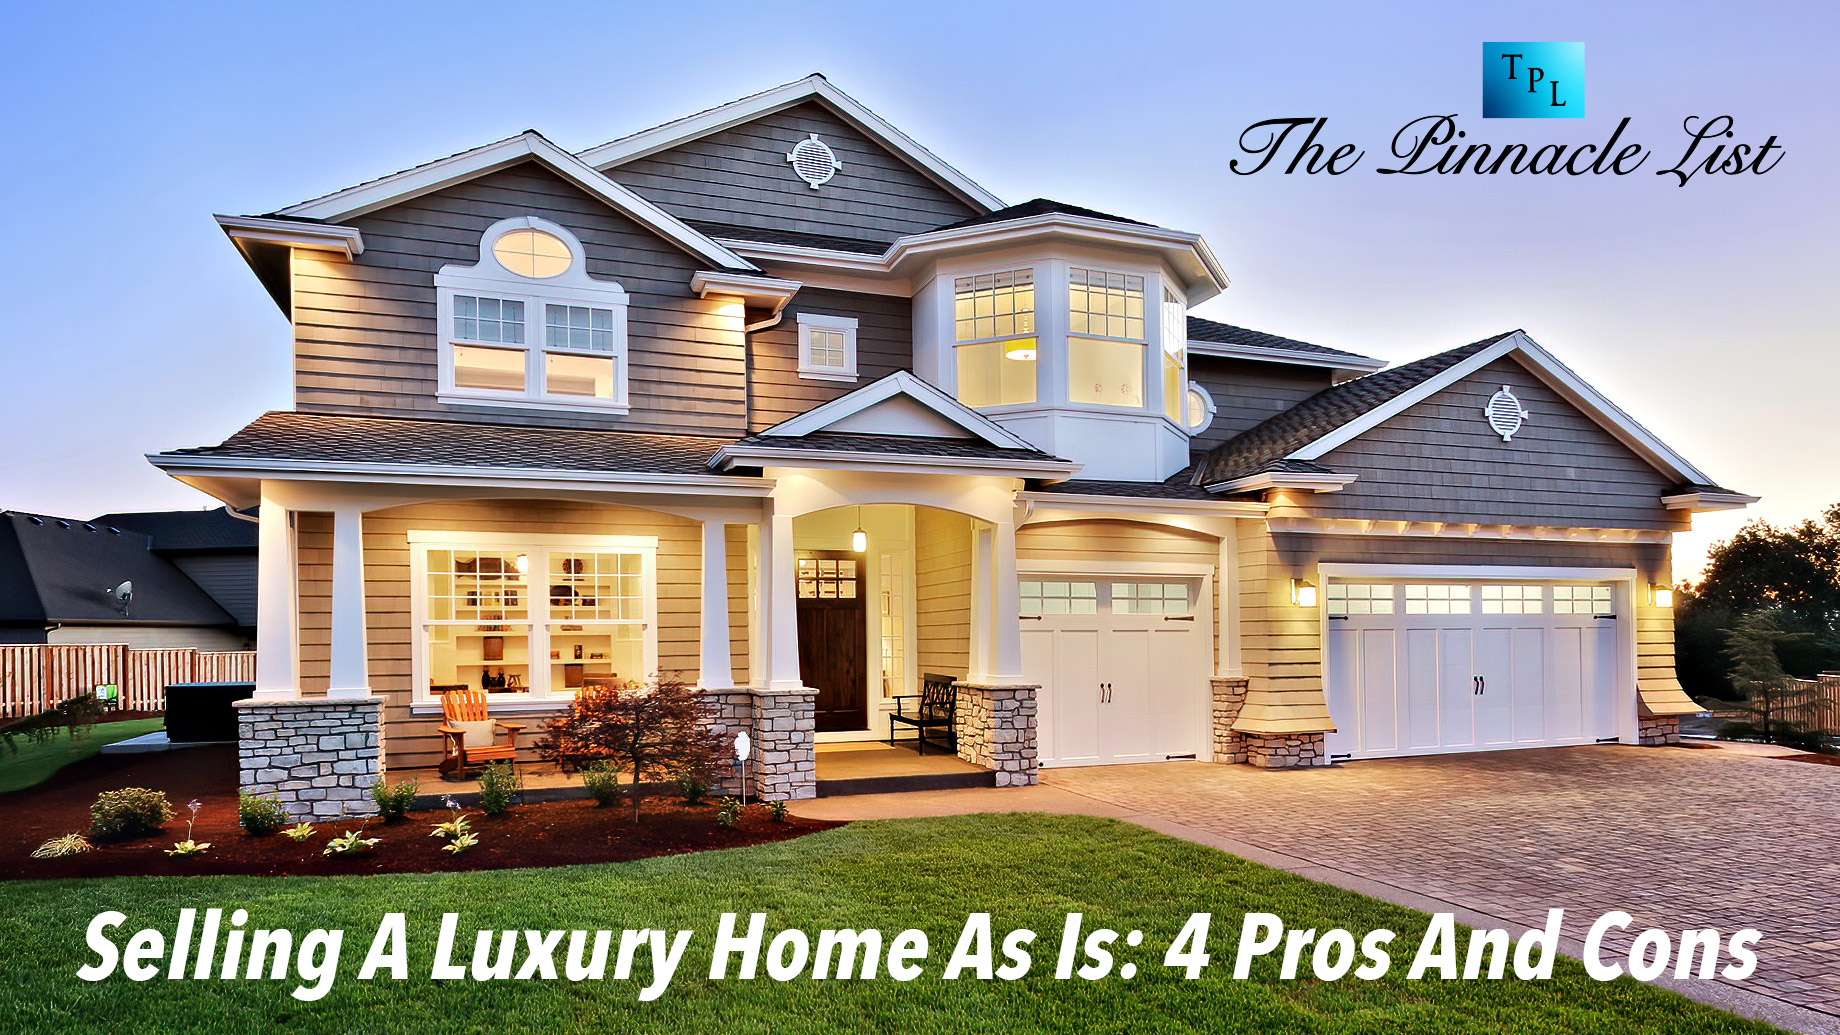 Selling A Luxury Home As Is: 4 Pros And Cons